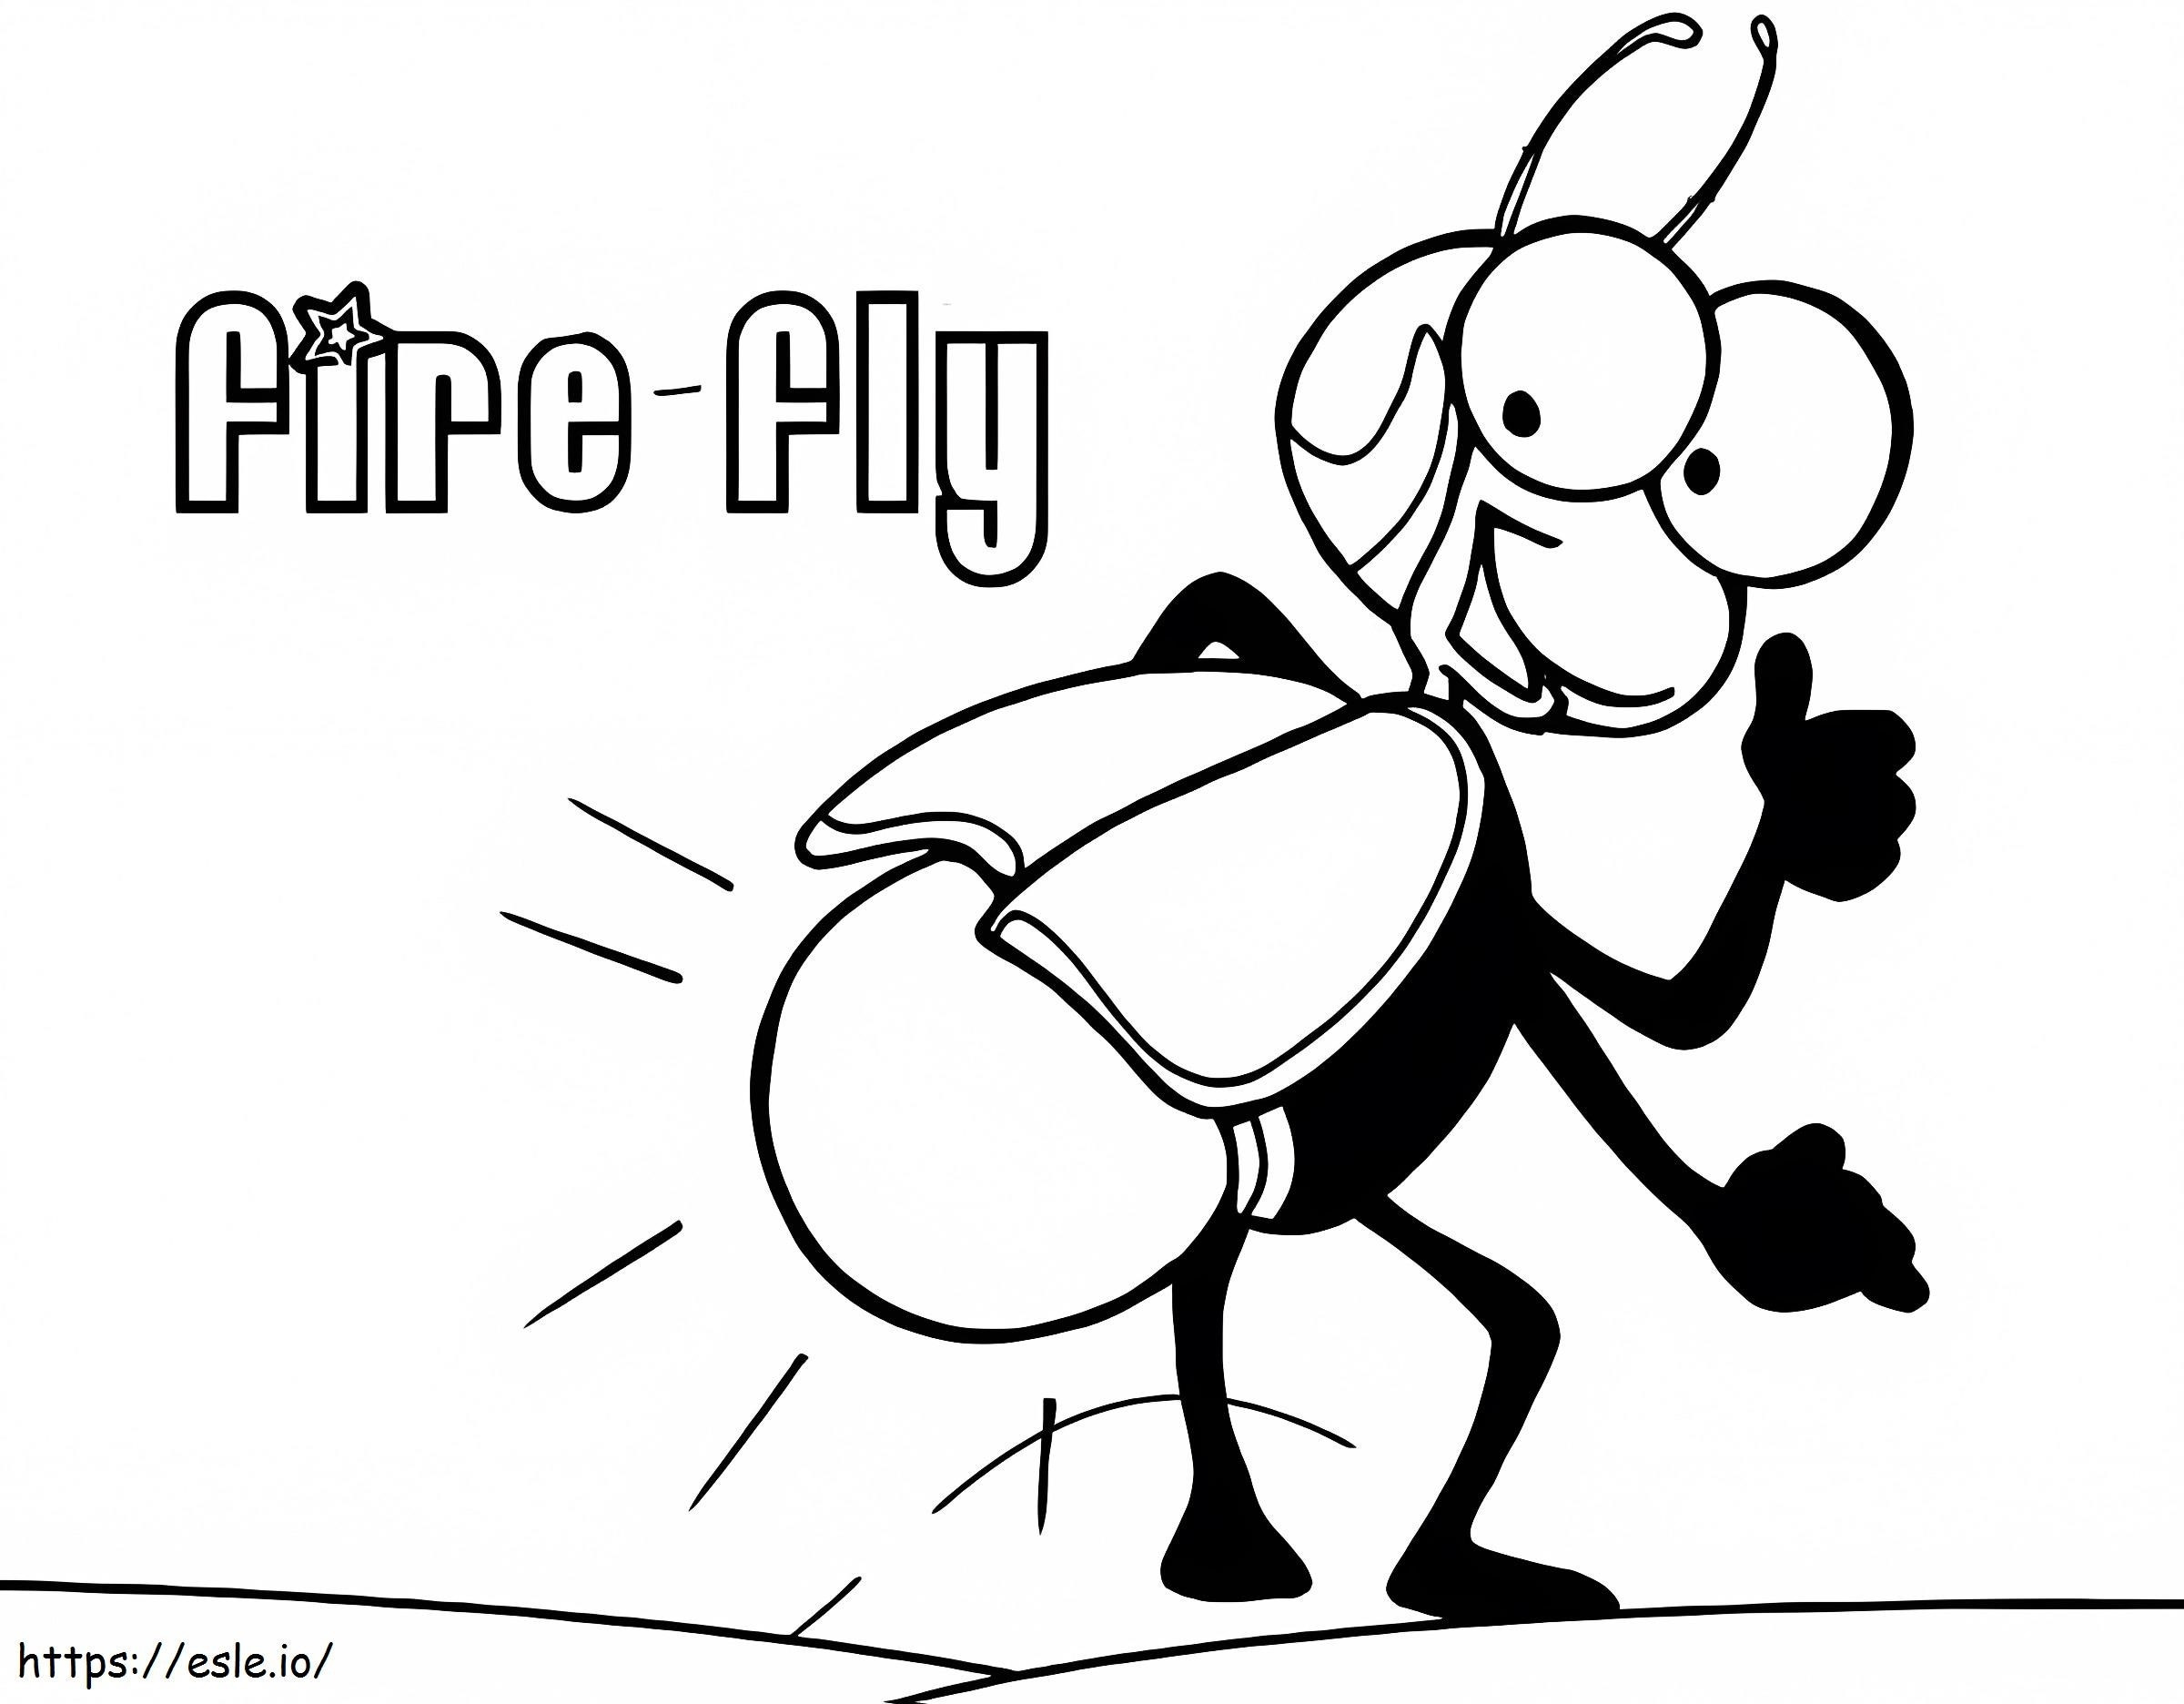 Animated Firefly coloring page